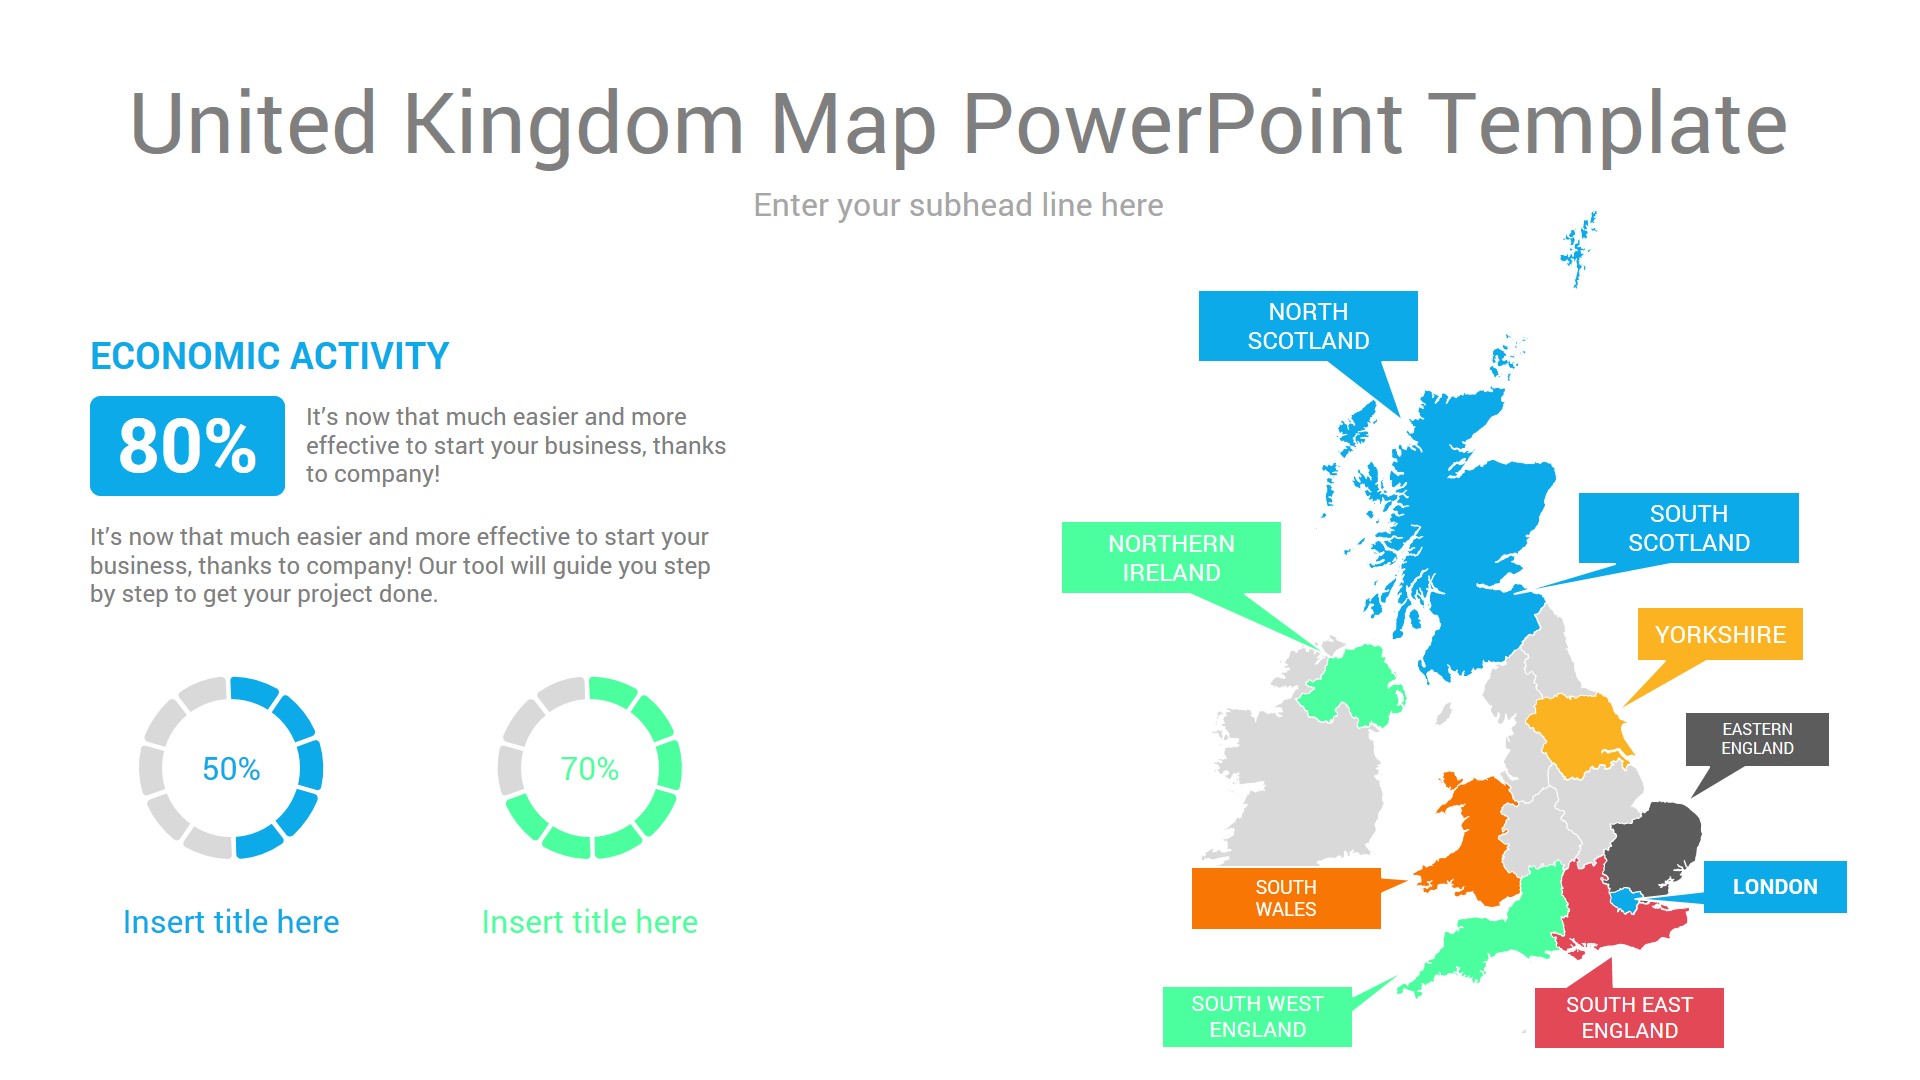 United Kingdom map powerpoint template